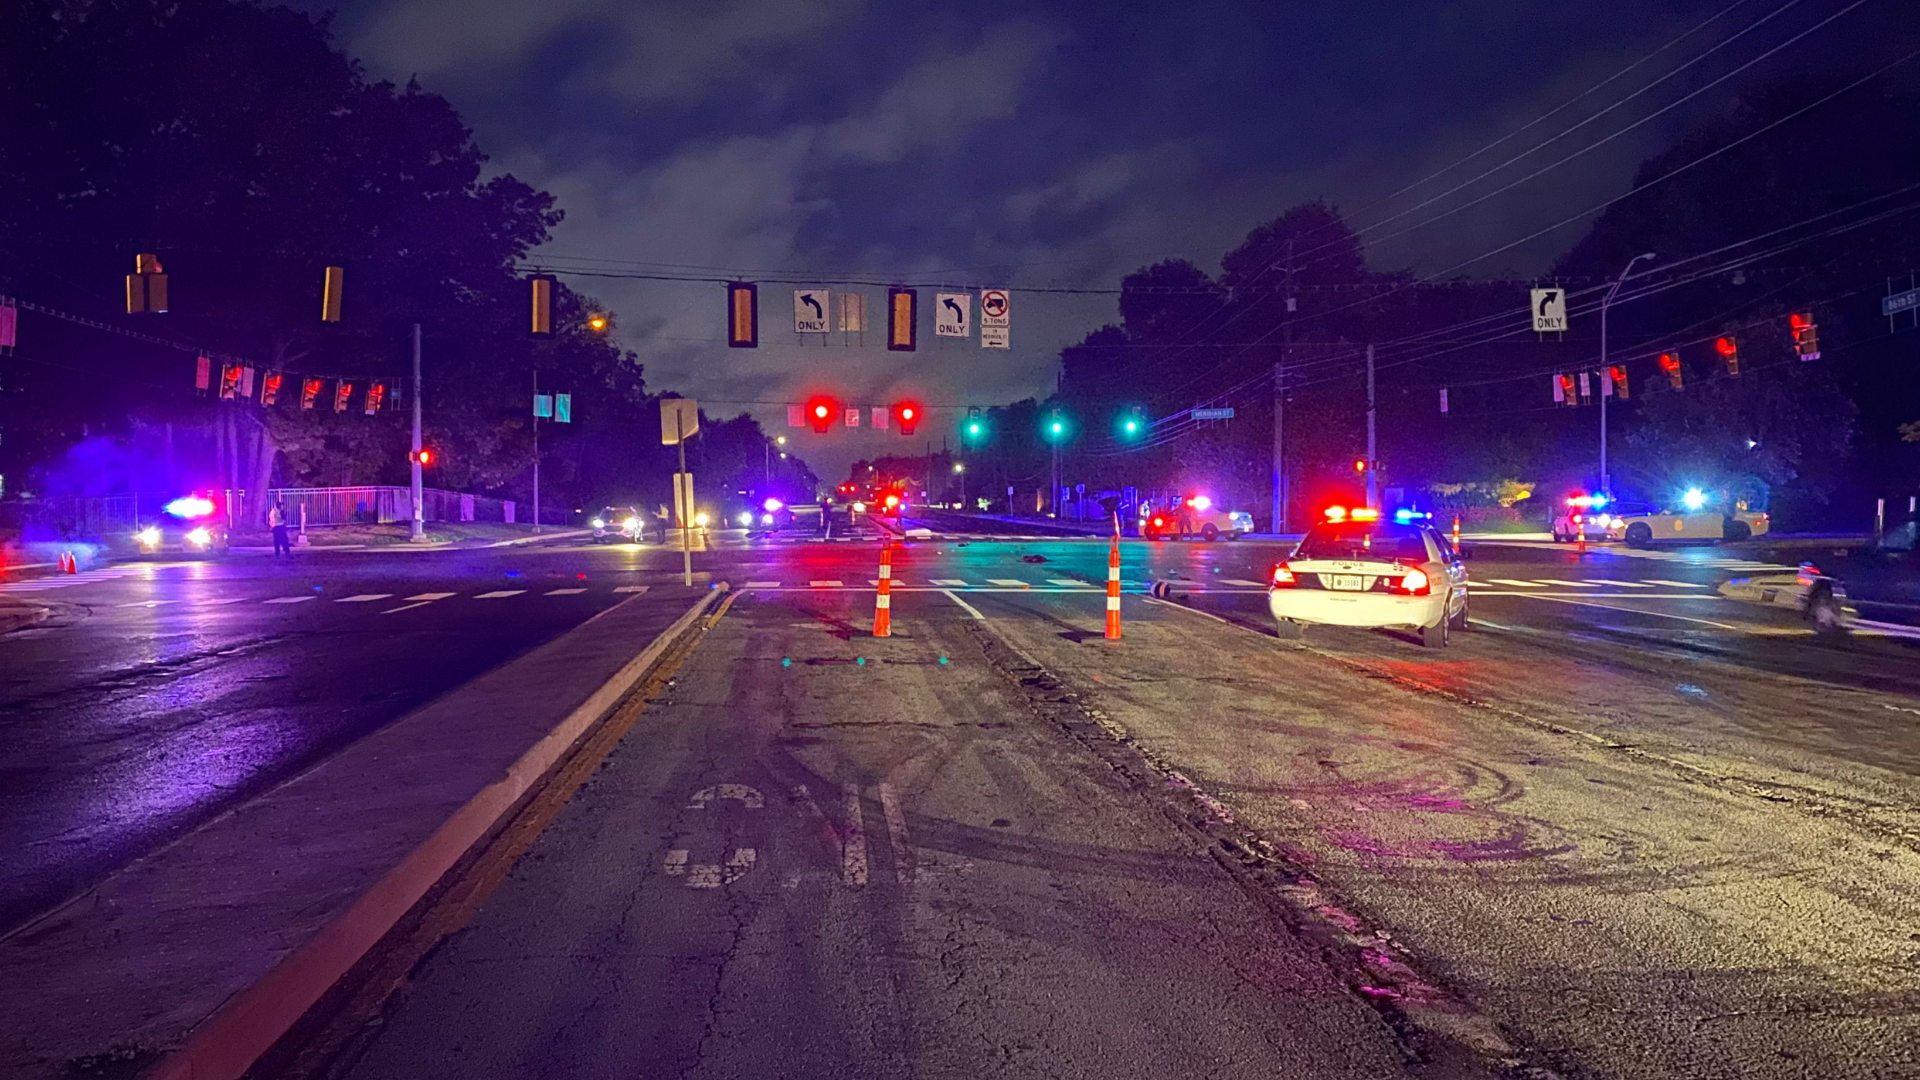 Police told 13News a motorcyclist was stopped at a red light on East 86th Street around 1:40 a.m. when he was hit by a gray Hyundai going to the same way.